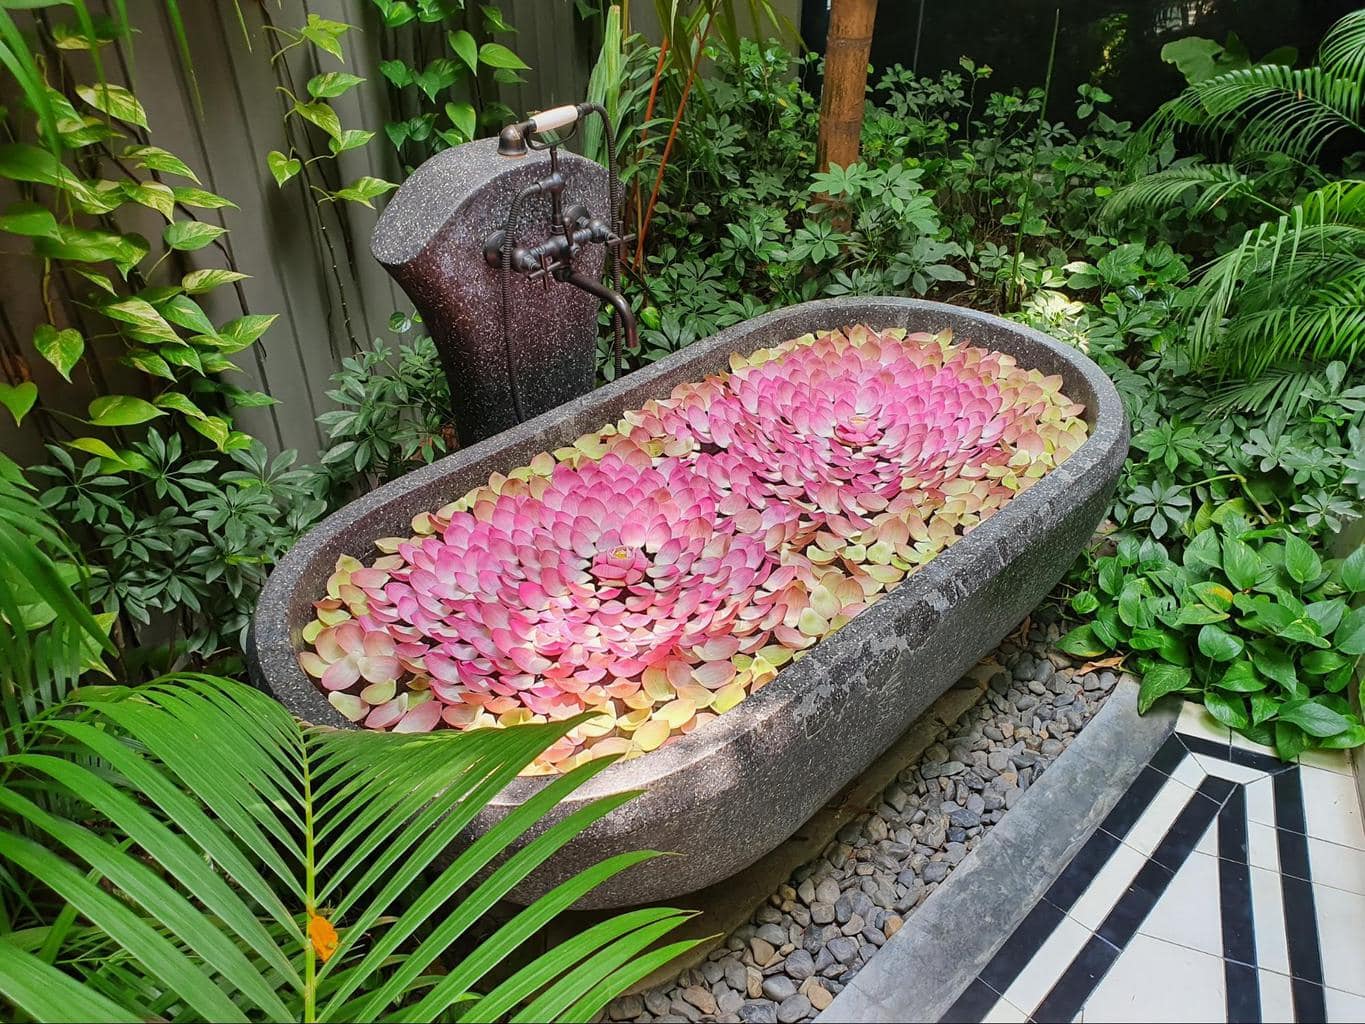 A surprise lotus flower bath prepared by our Bensley Butler